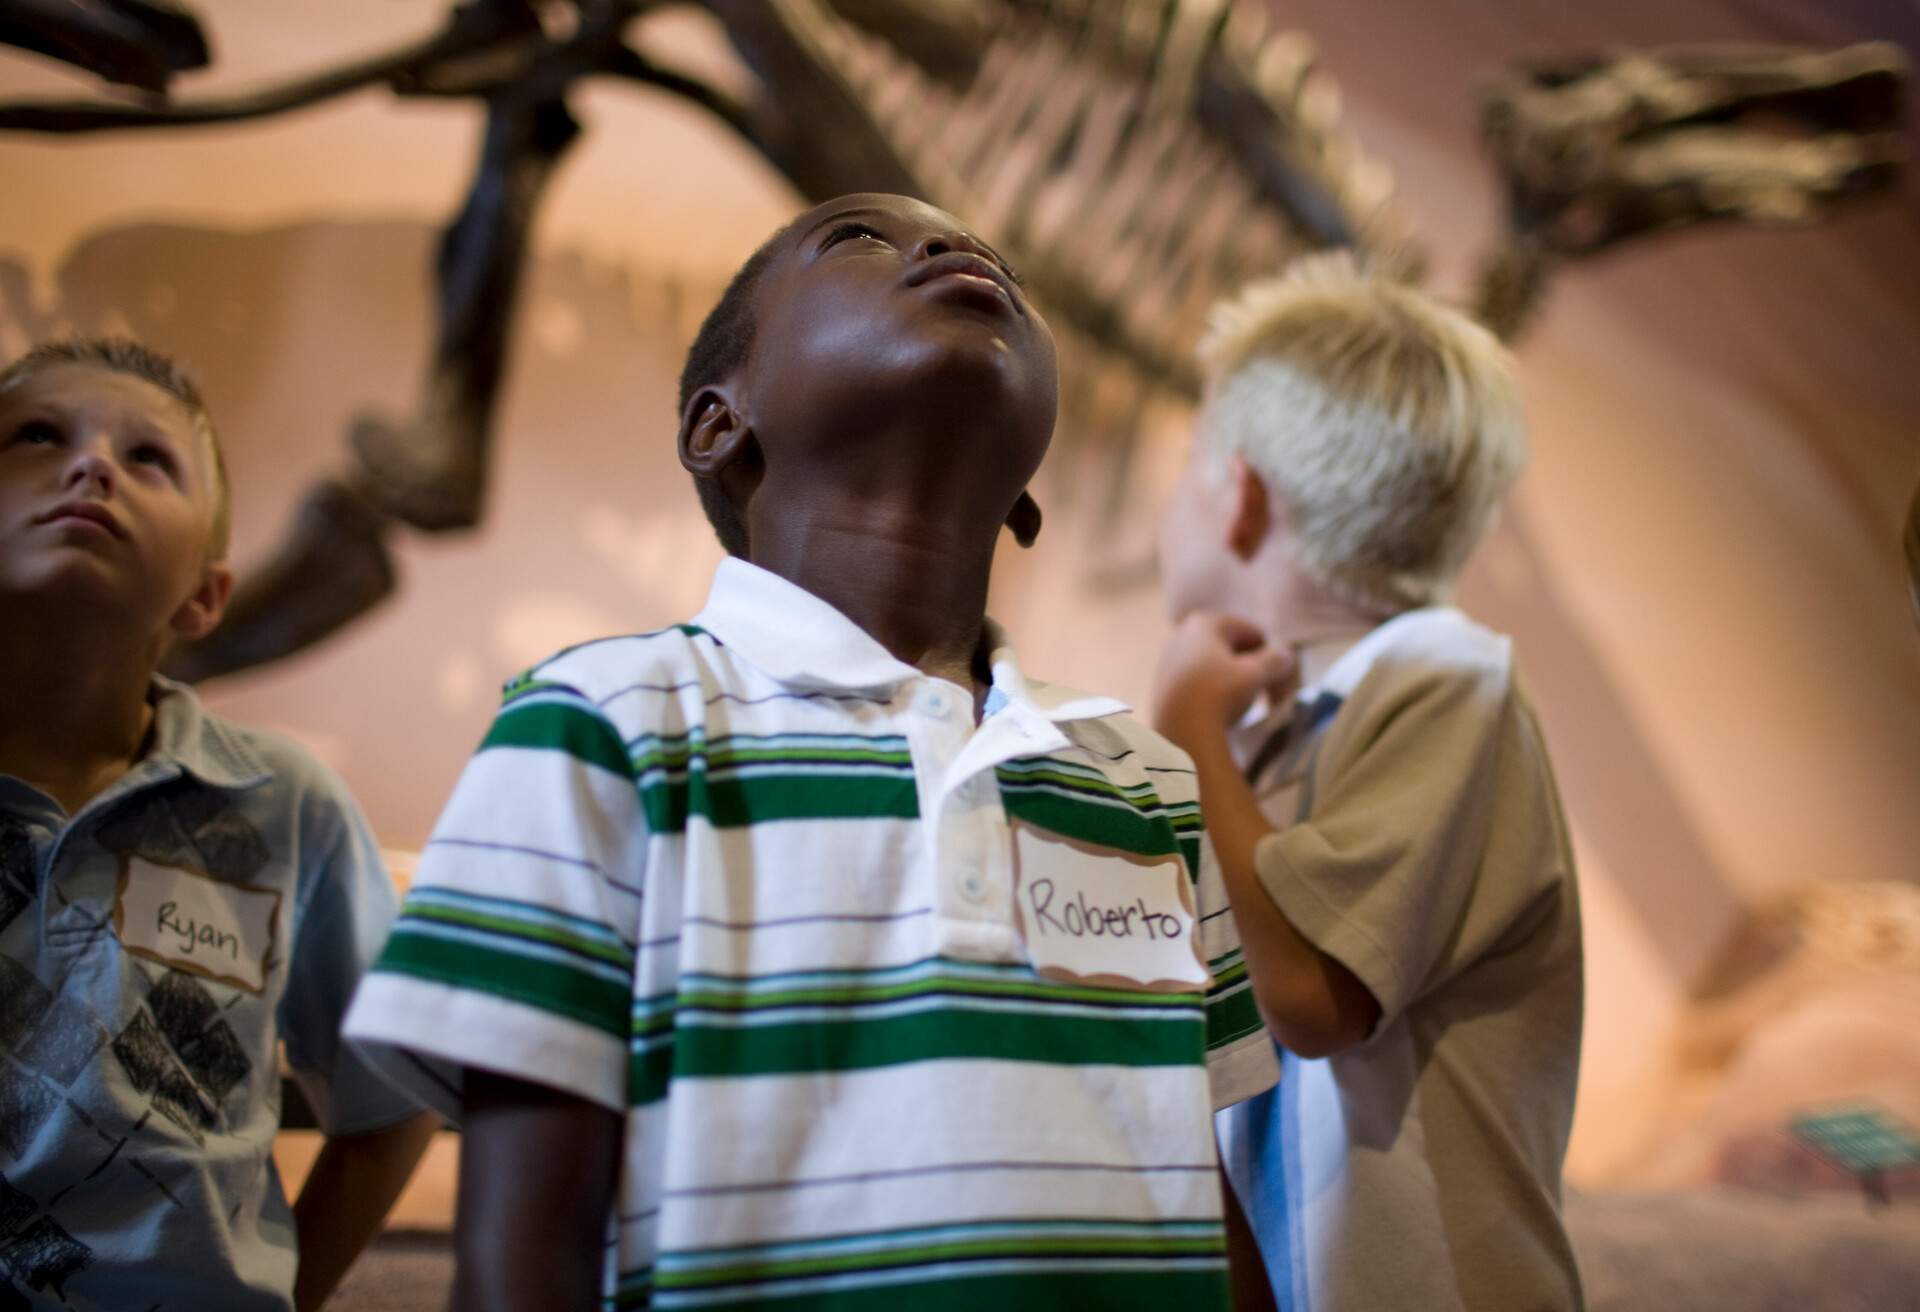 Two kids with name badges on their shirts glance up, while one looks back at a dinosaur exhibit.